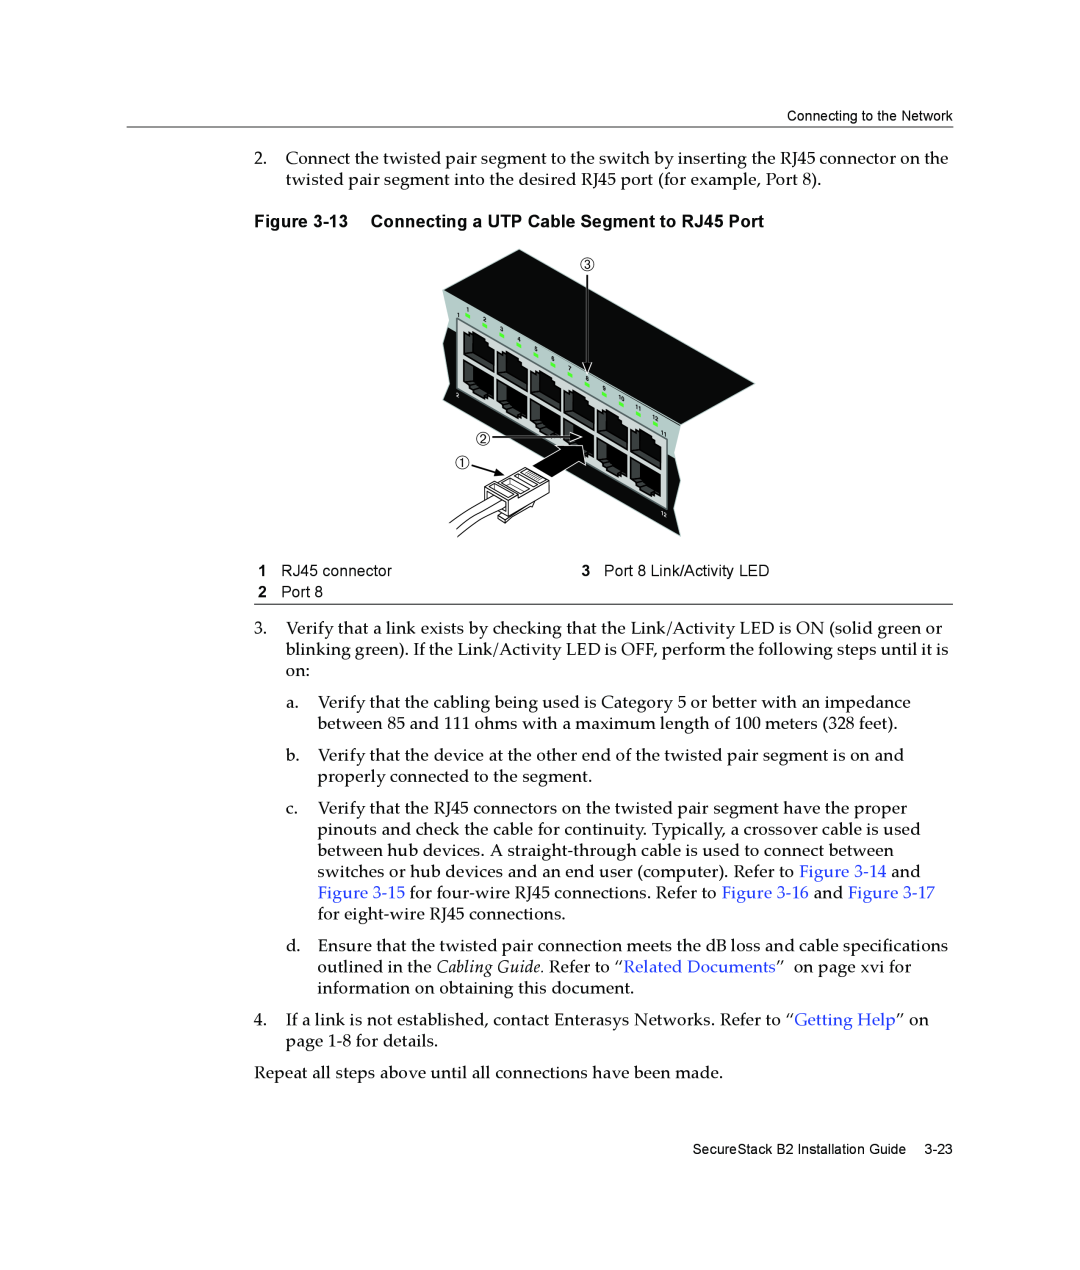 Enterasys Networks B2G124-24 manual 13 Connecting a UTP Cable Segment to RJ45 Port 